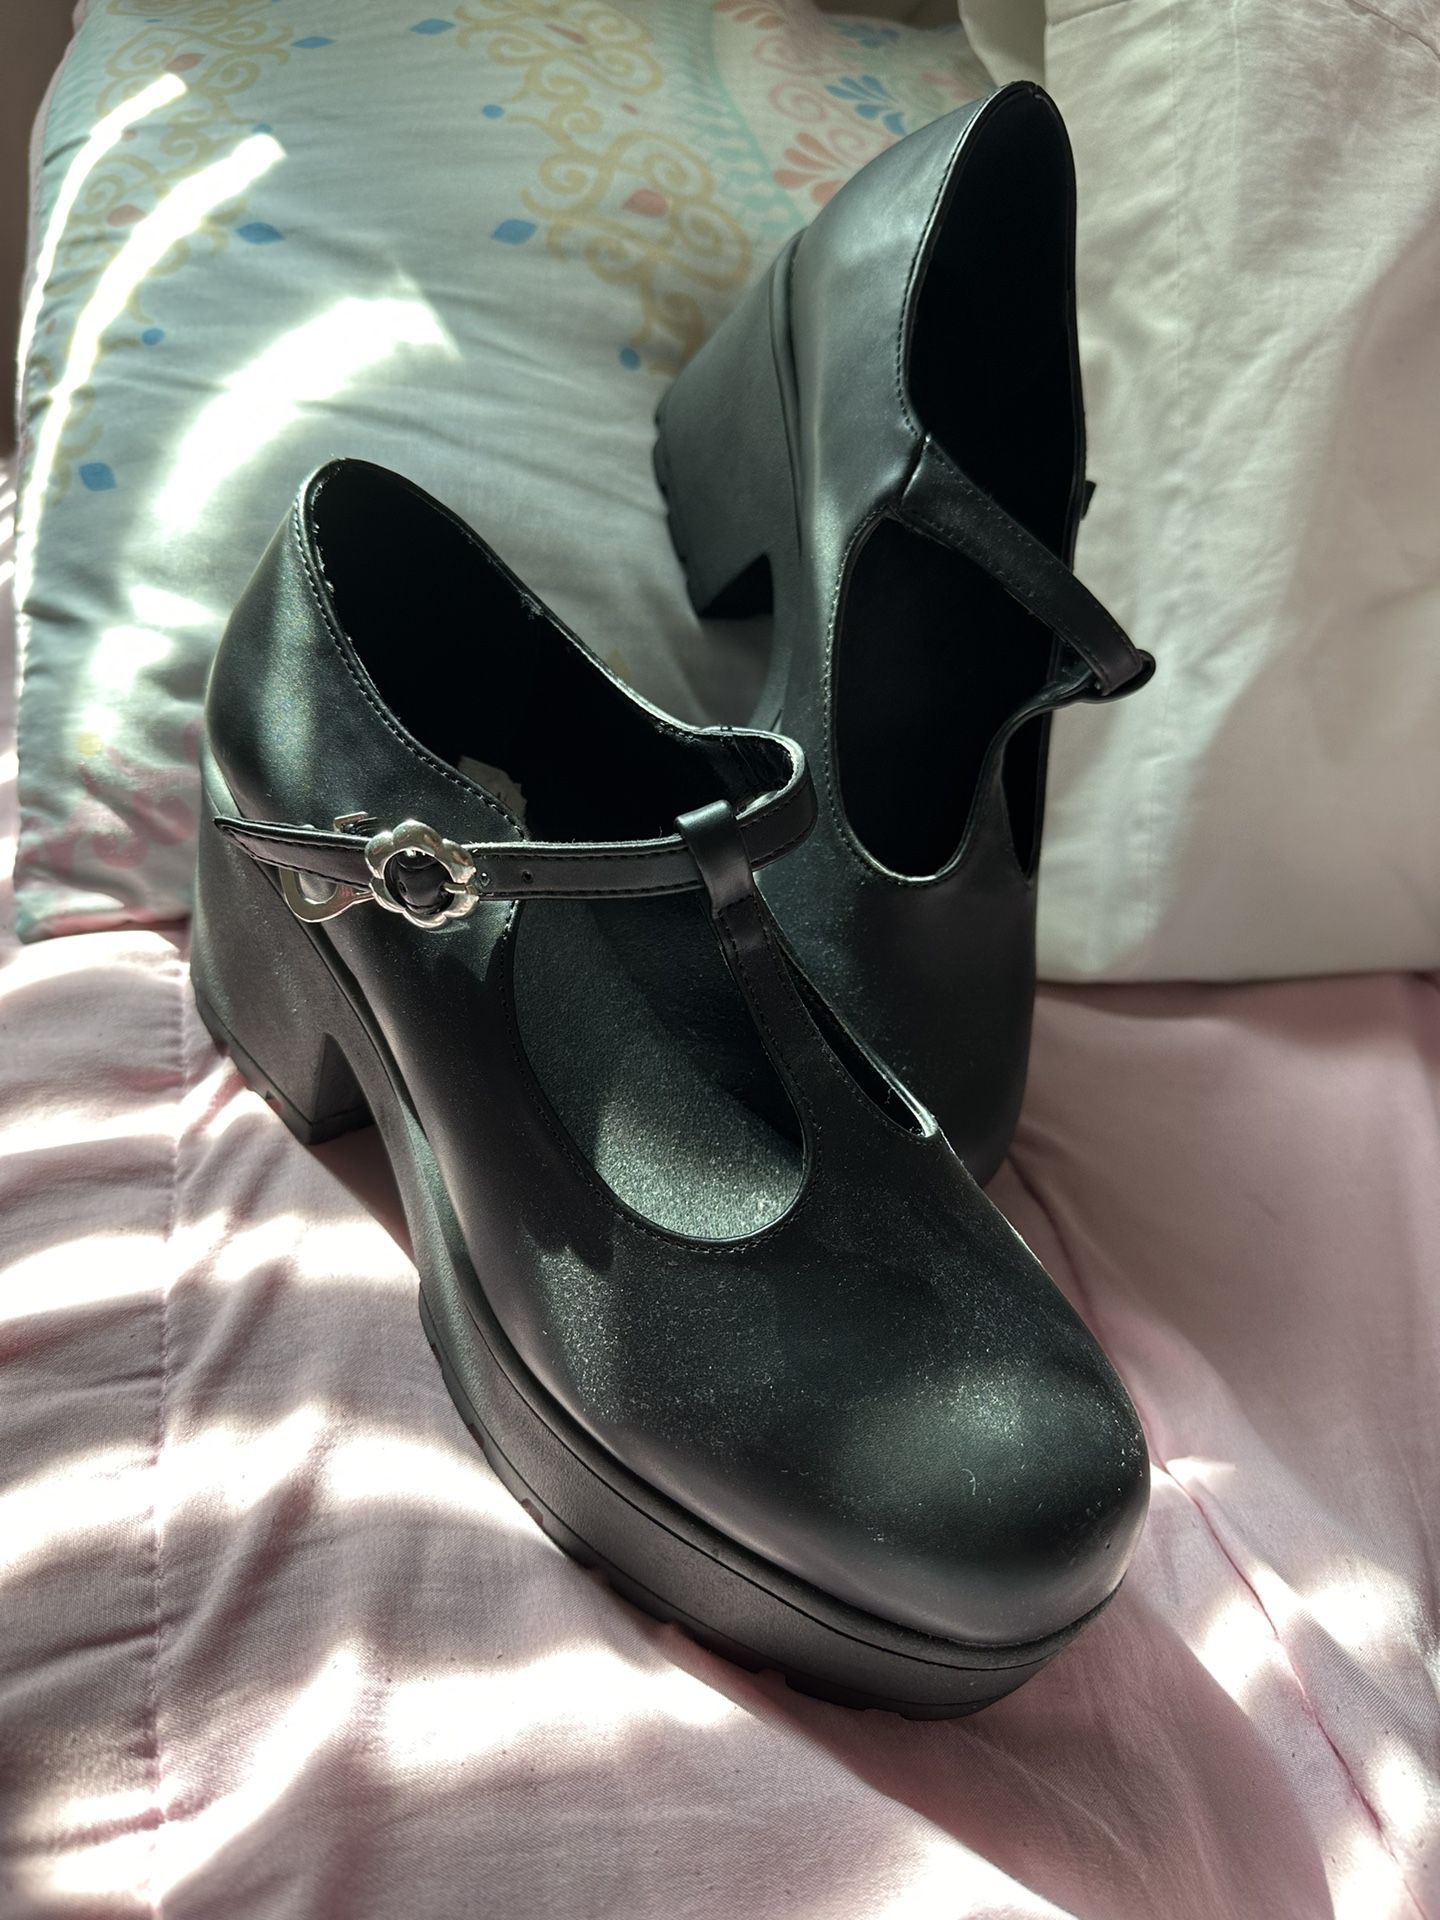 Mary Jane Heels for Sale in Houston, TX - OfferUp